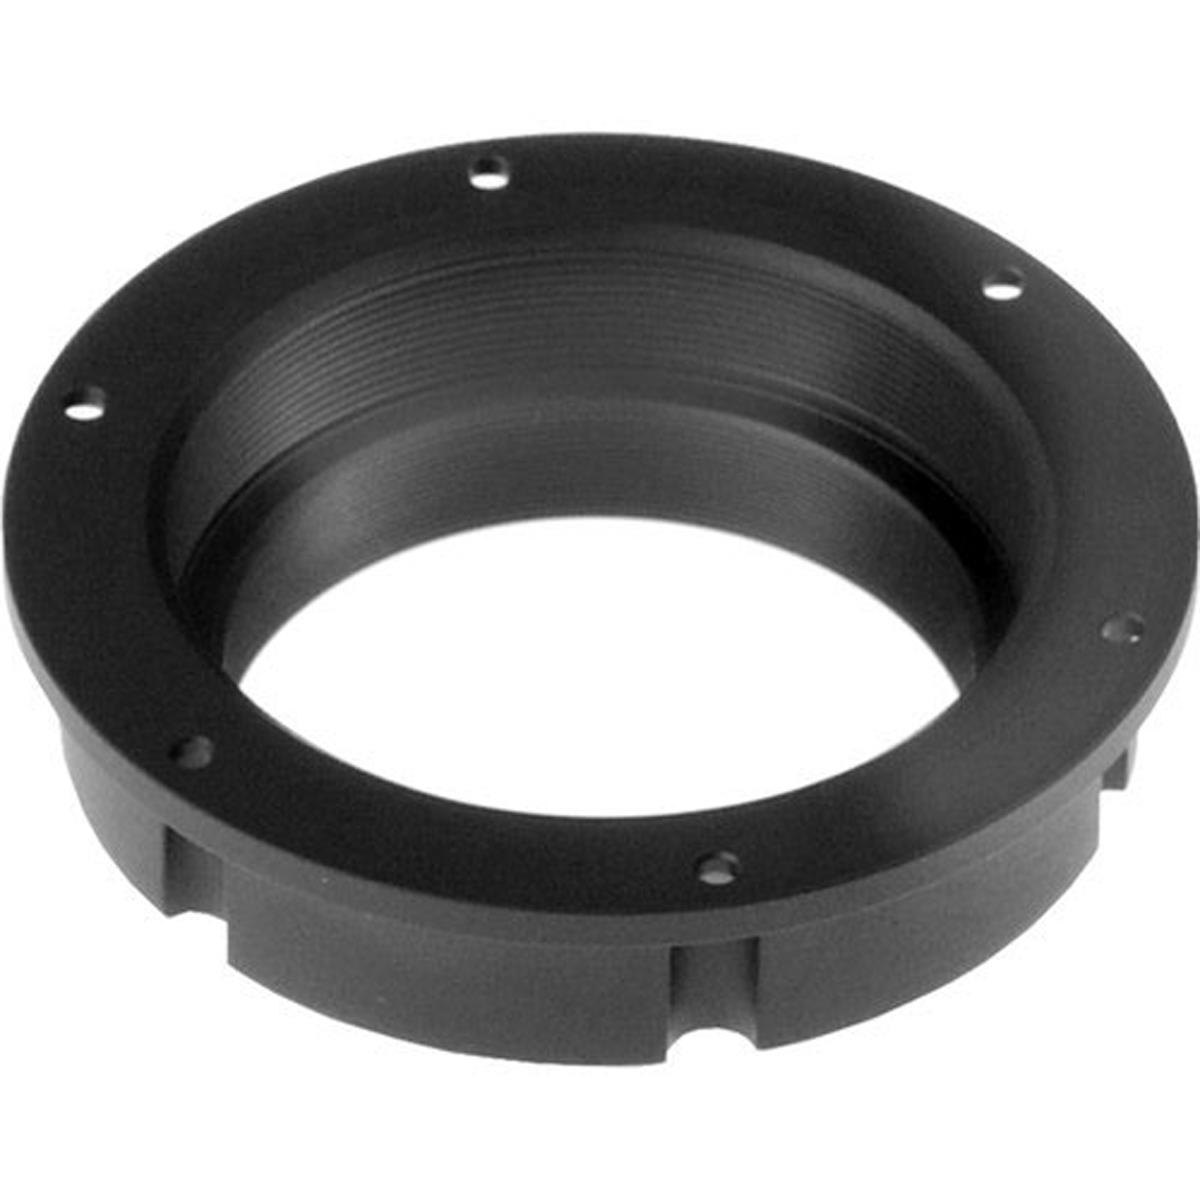 Image of 16x9 Cine Lens Mount Sony E Mount ONLY